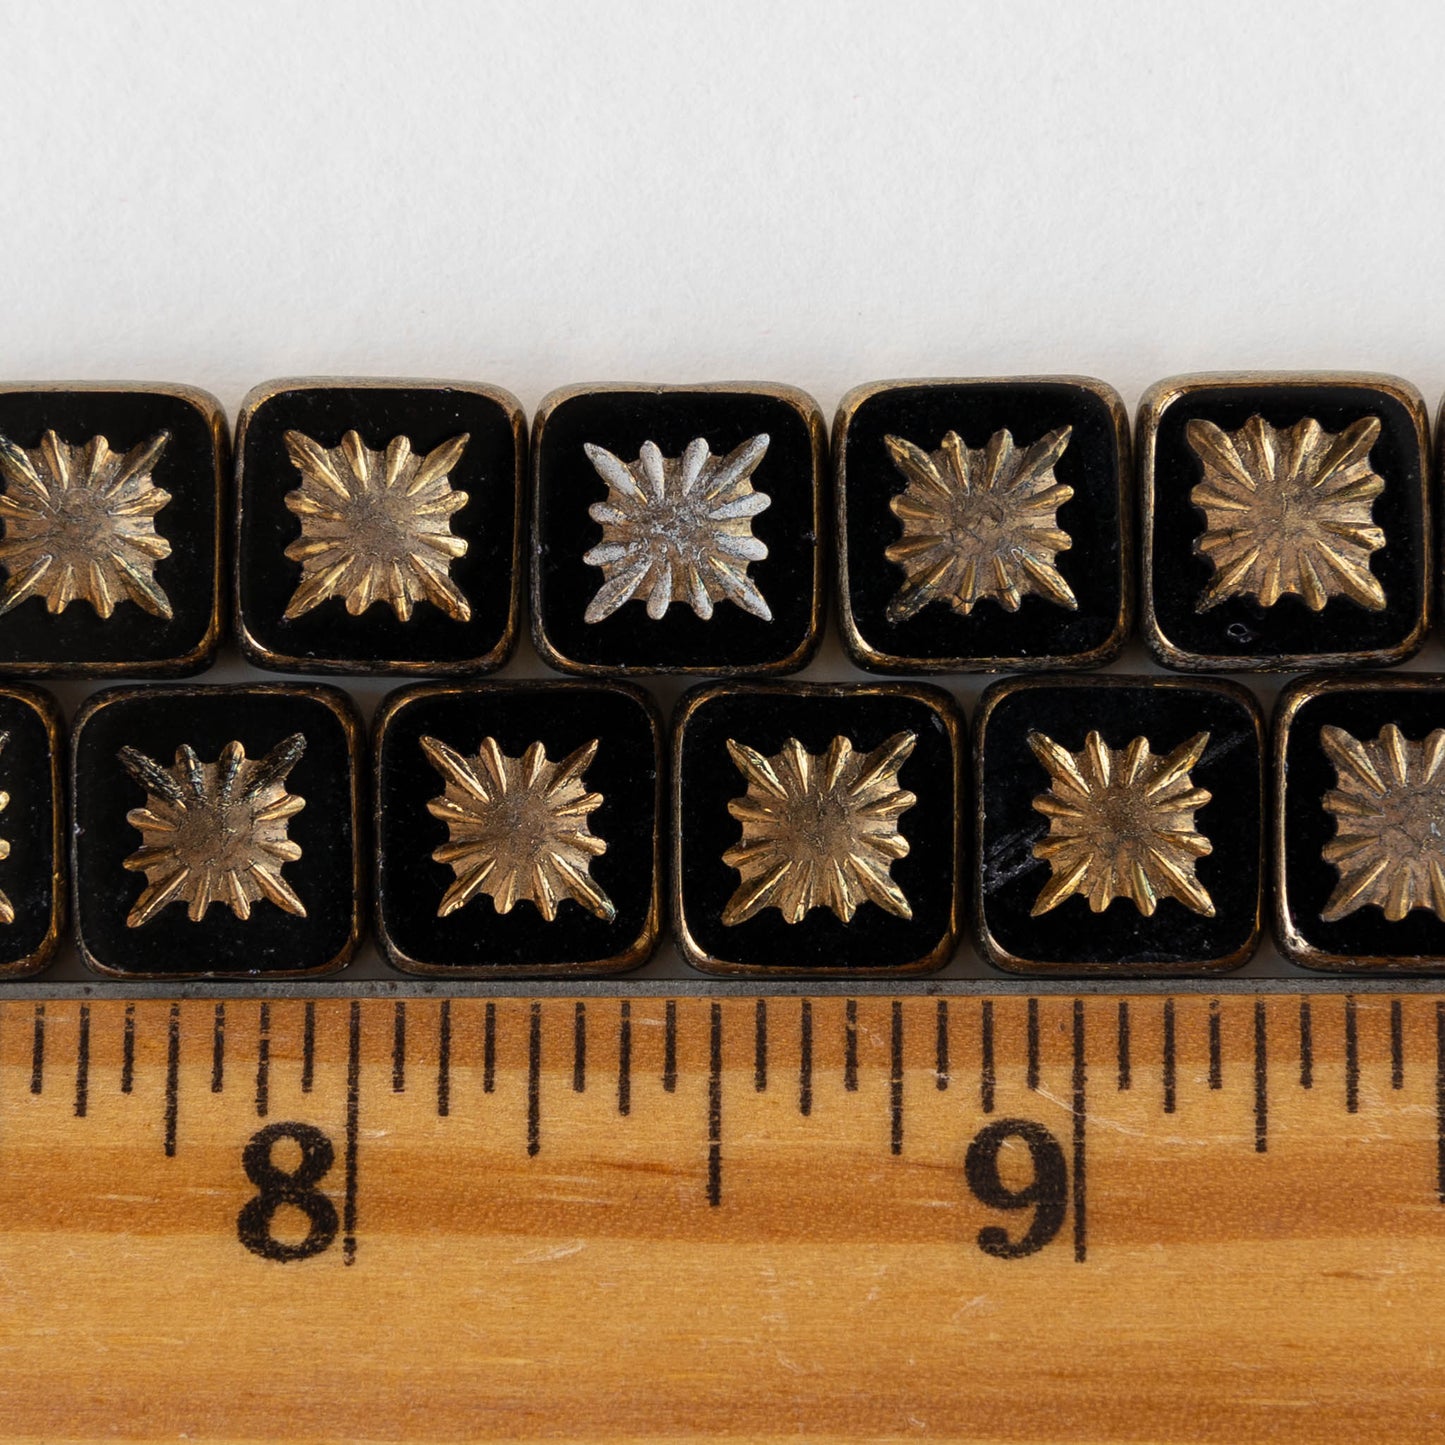 10mm Glass Tile Beads - Opaque Black with Gold Wash - 10